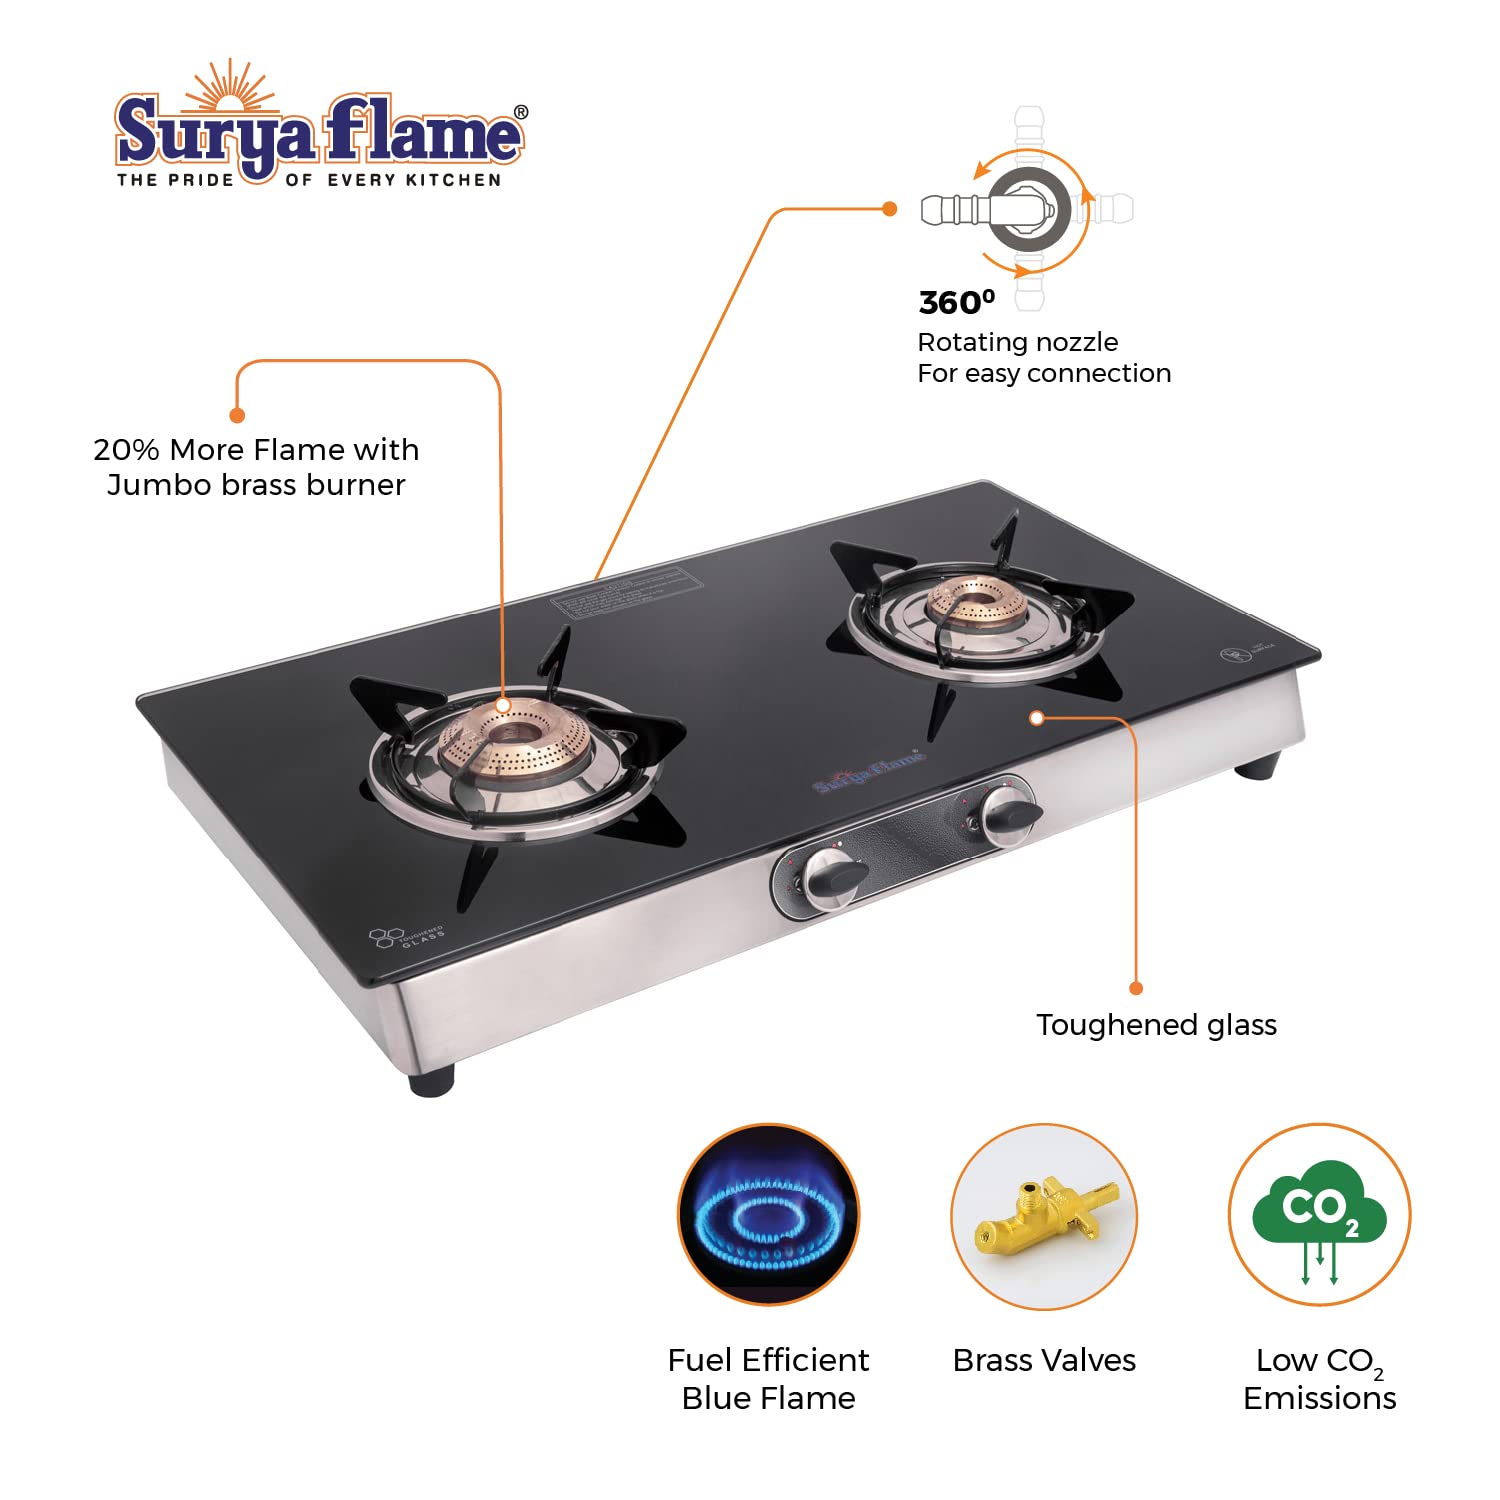 Surya Flame Supreme Gas Stove Glass Top | Stainless Steel Body | LPG Stove with Jumbo Burner & Spill Proof Design - 2 Years Complete Doorstep Warranty (2 Burner, 2)